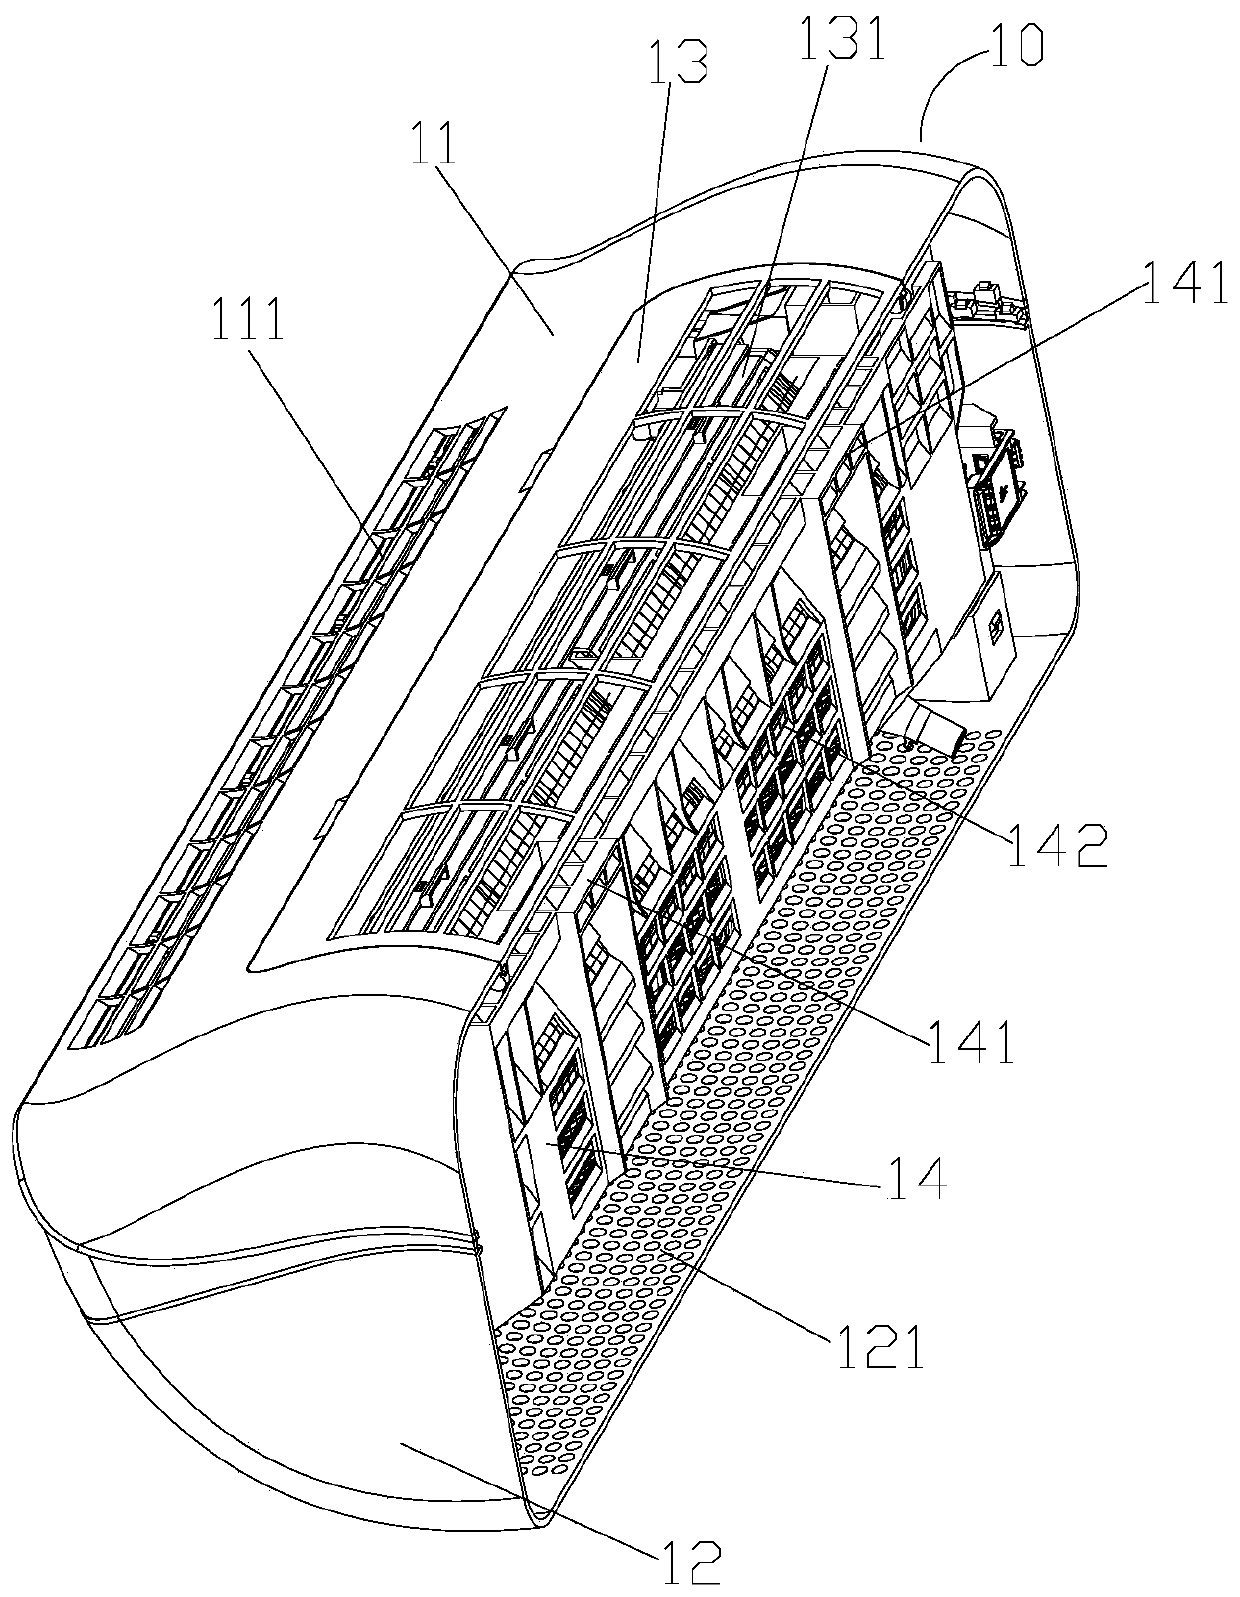 Outer shell assembly and wall-mounted air conditioner